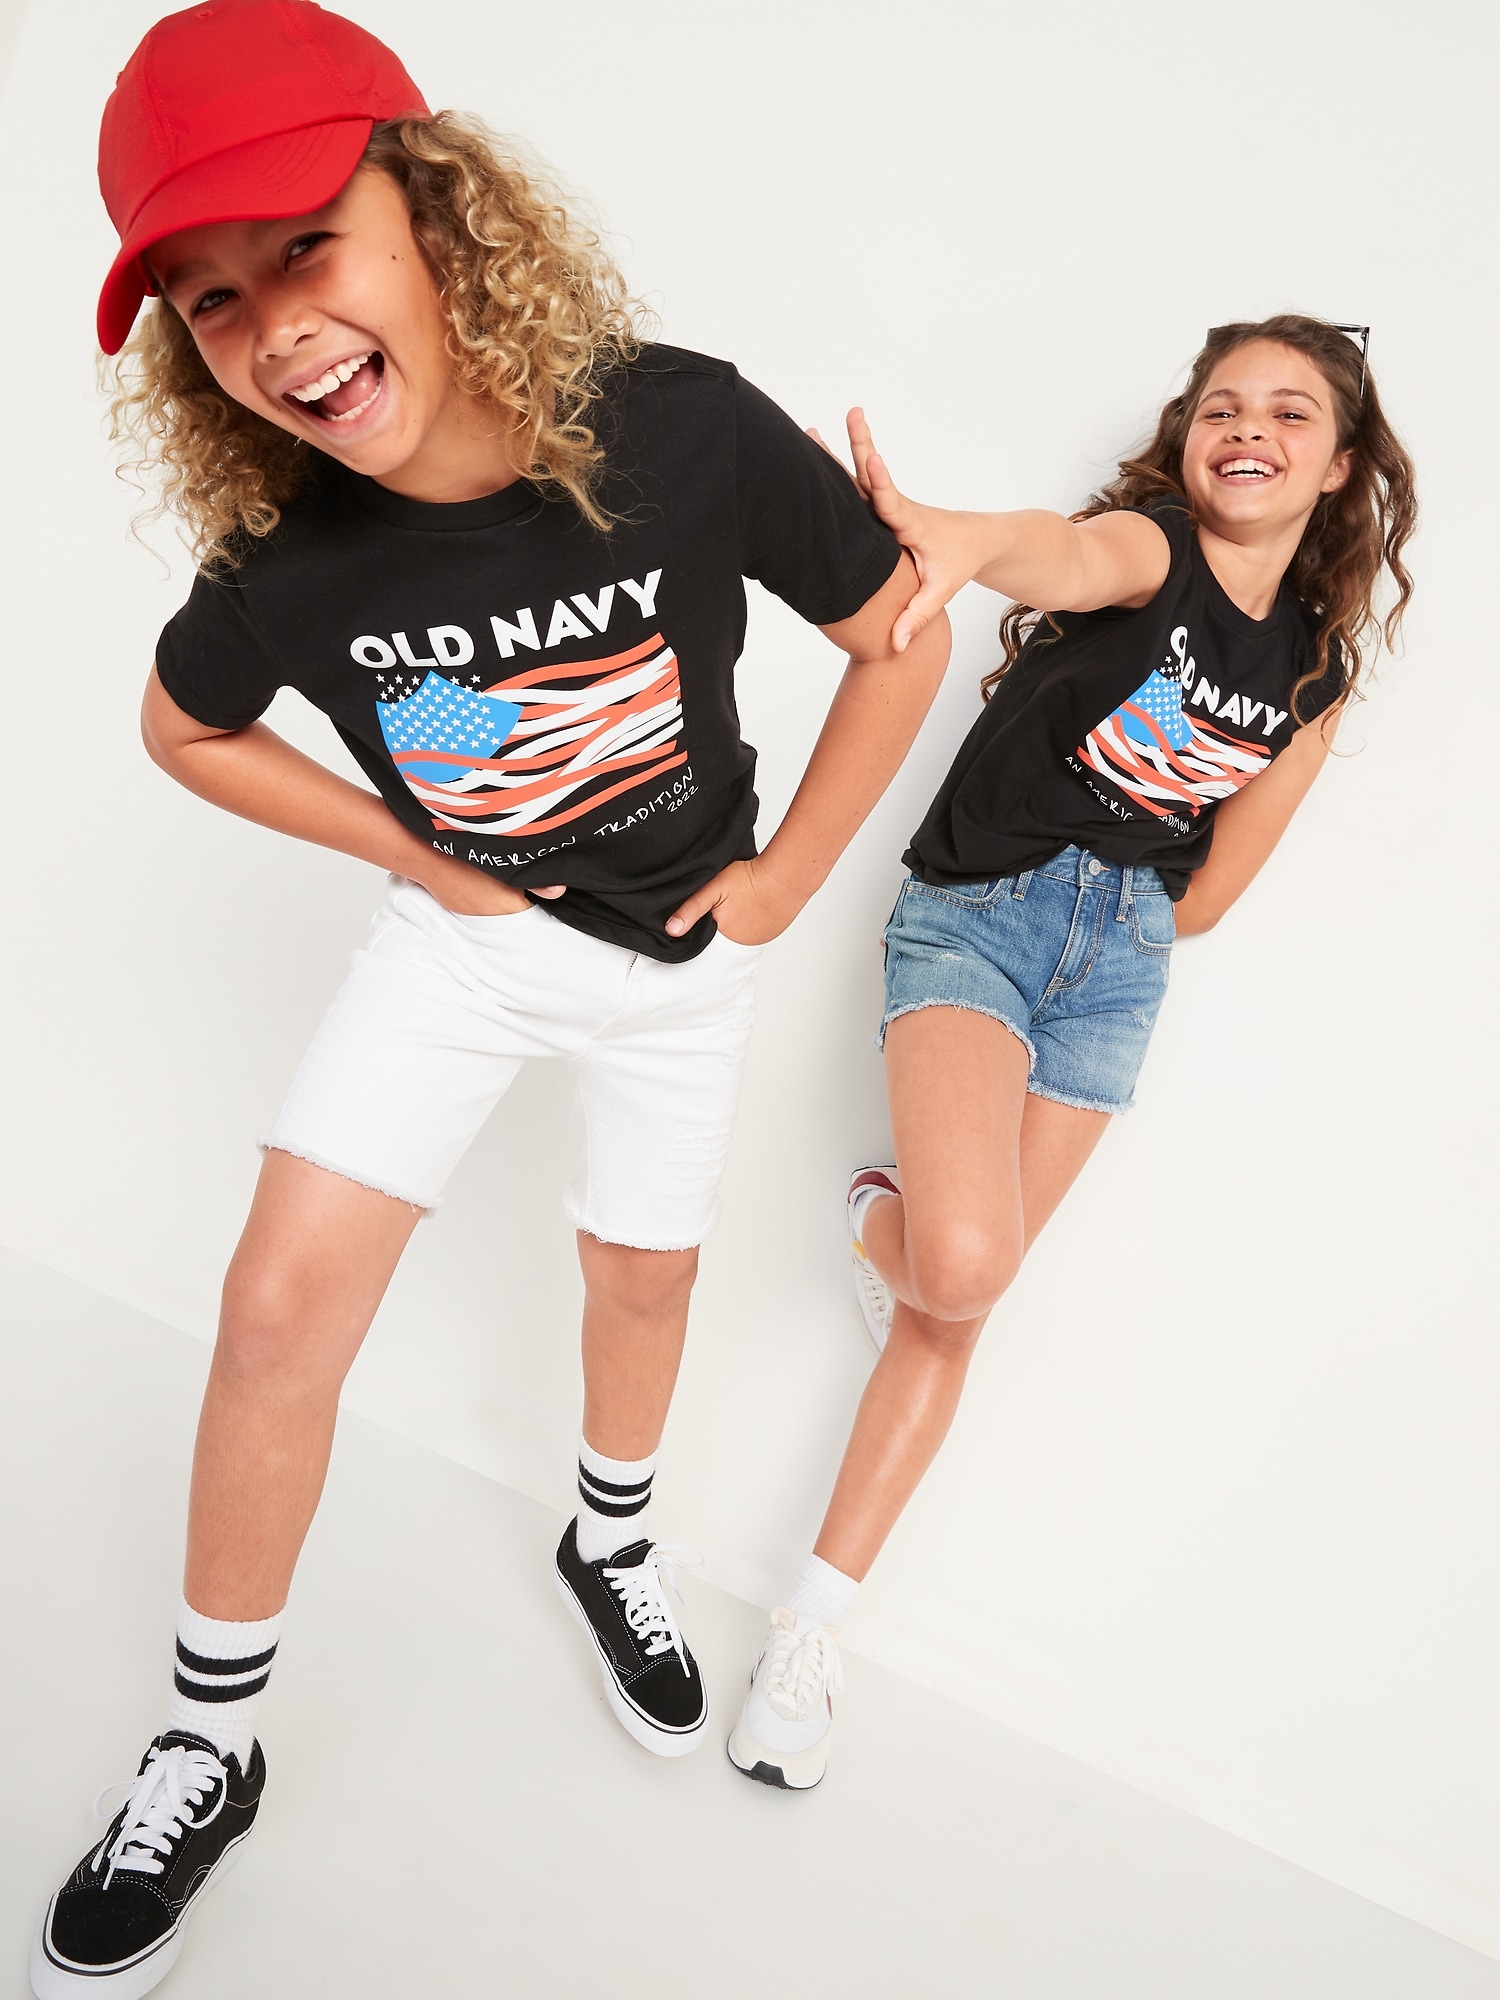 Project WE U.S. Flag 2022 Graphic T-Shirt for Kids On Sale At Old Navy